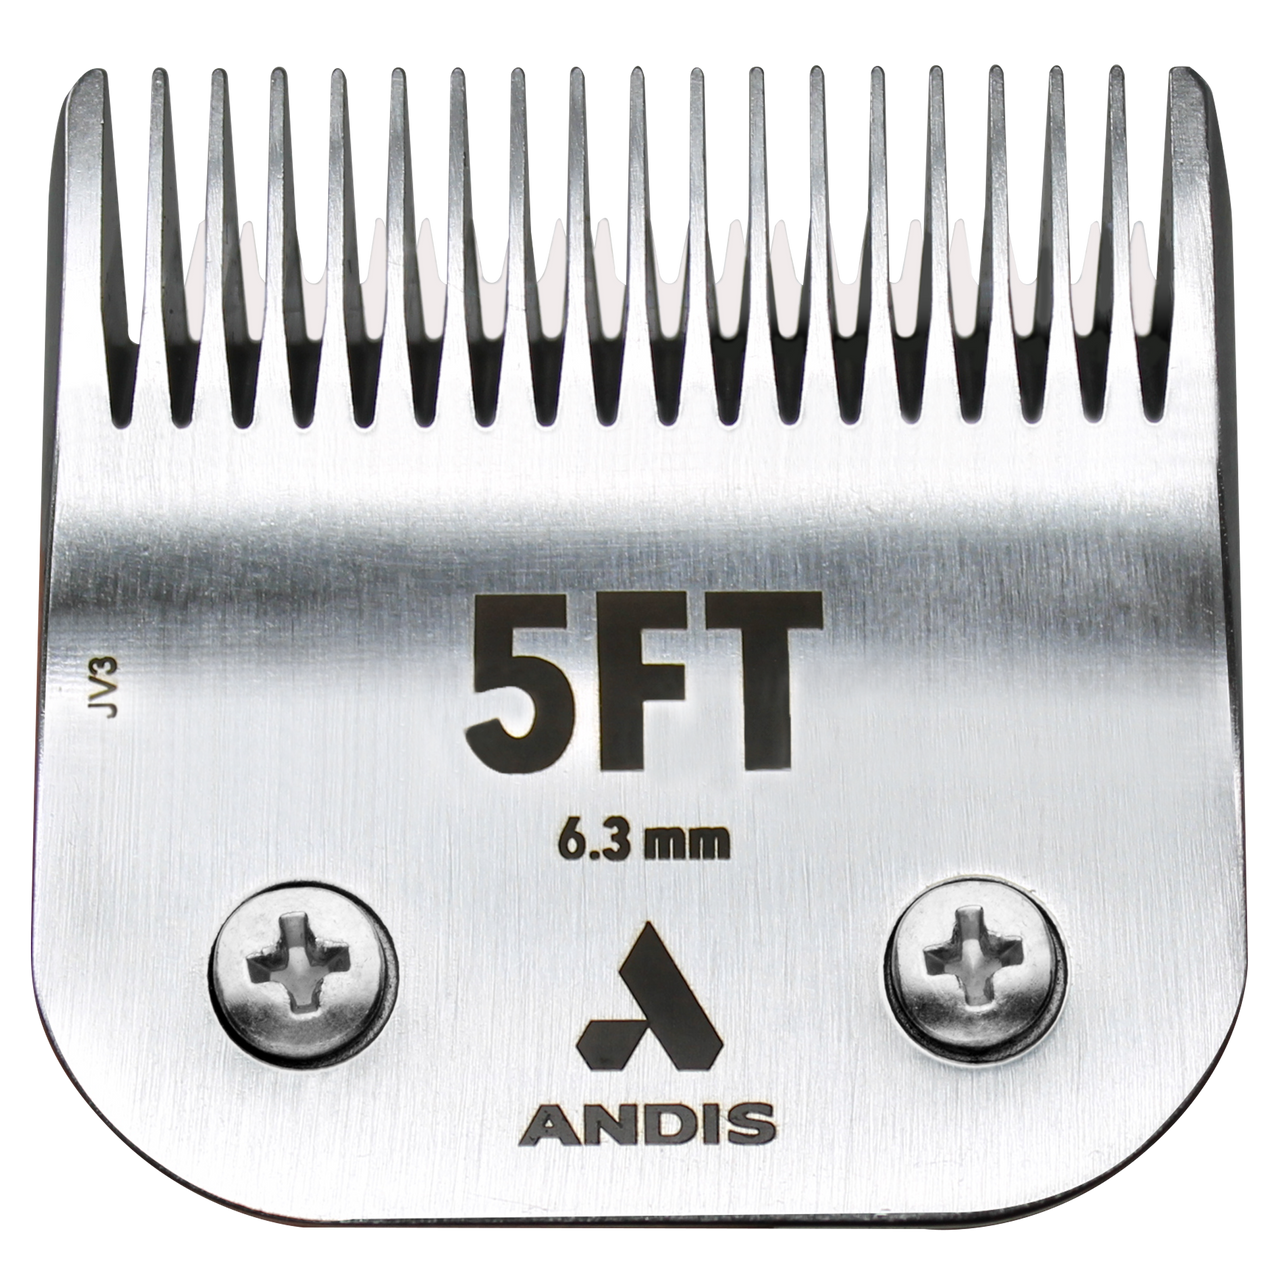 Ceramic Edge 24T Extra Fine Tooth Cutter by Andis